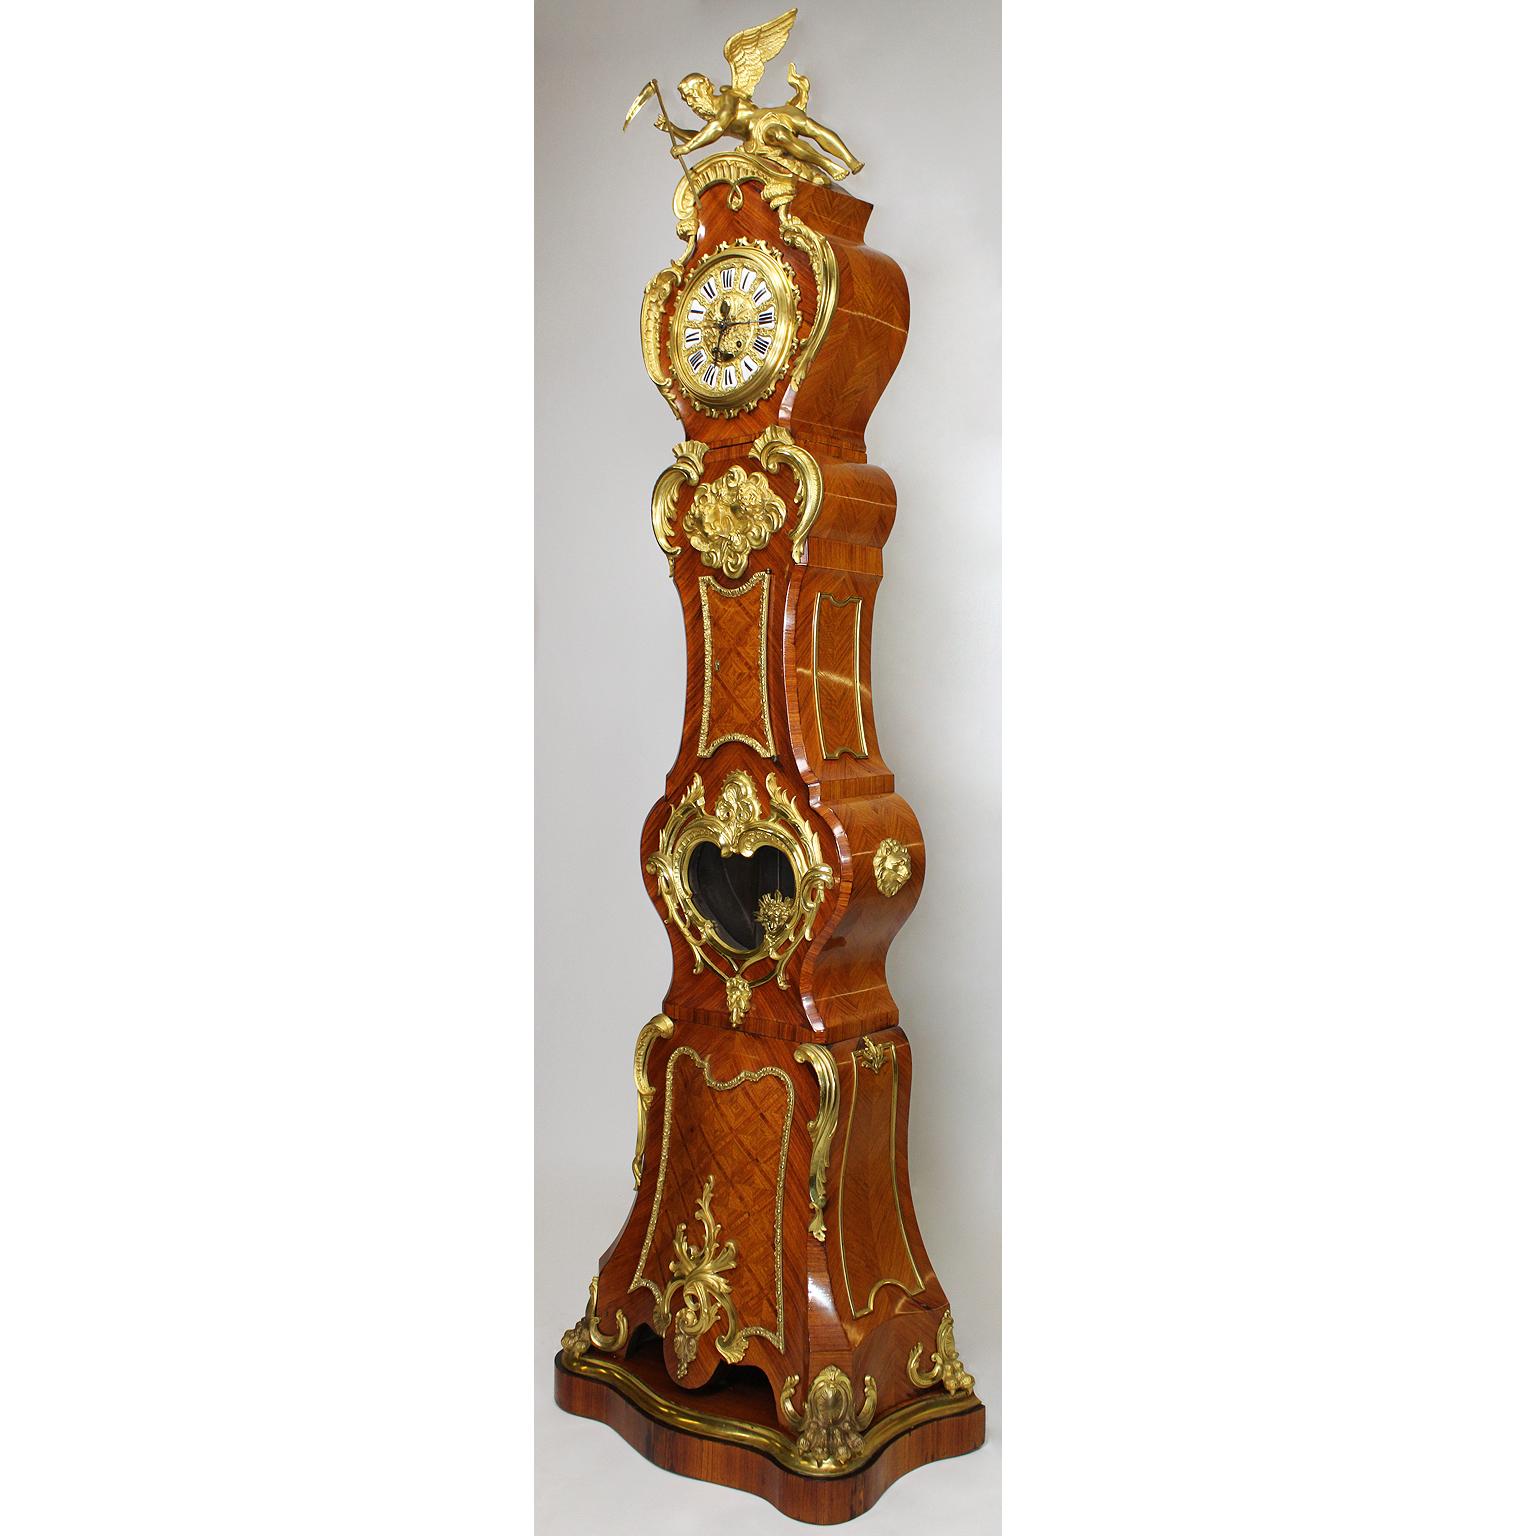 A fine French 19th-20th century Régence style gilt bronze mounted tulipwood parquetry regulator longcase clock, after the 18th century model by Julien Le Roy (French, 1686-1759) and Charles Cressent (French, 1685-1768). The asymmetrical